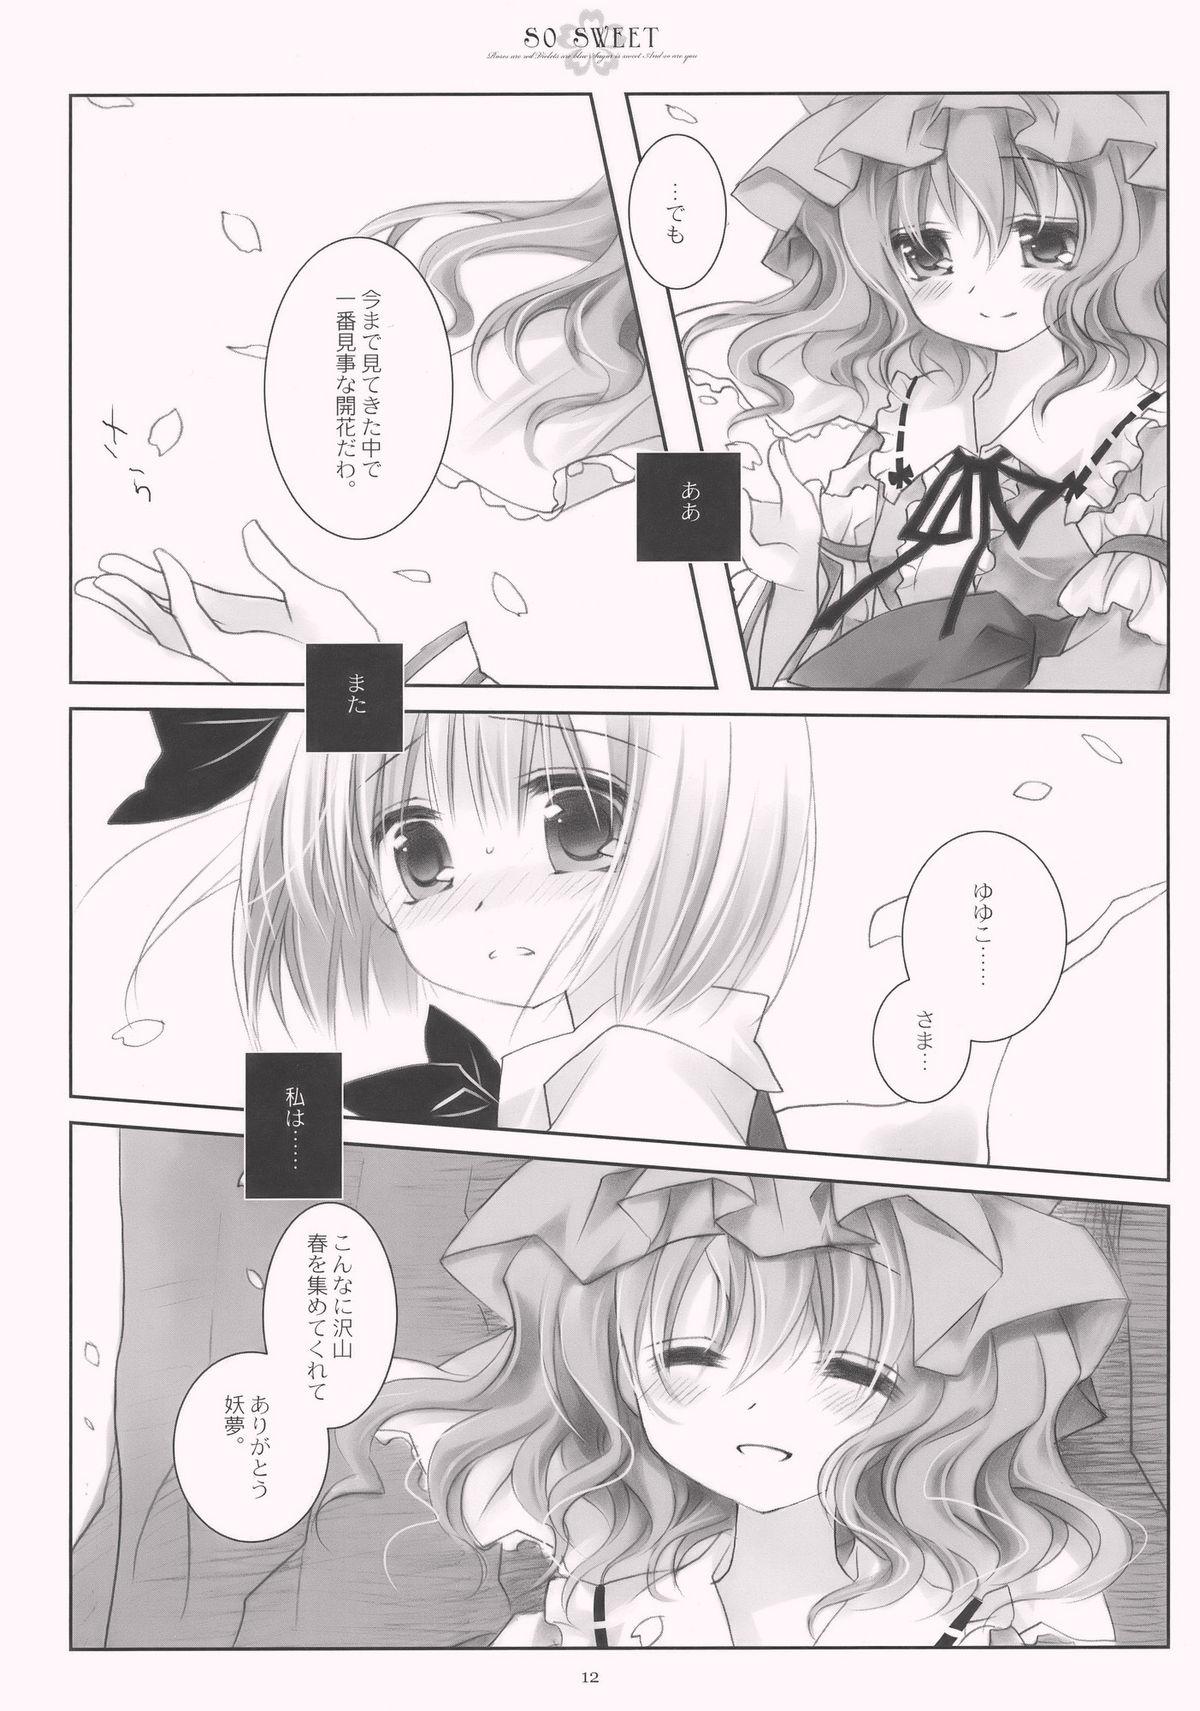 Livesex SO SWEET - Touhou project Asshole - Page 12